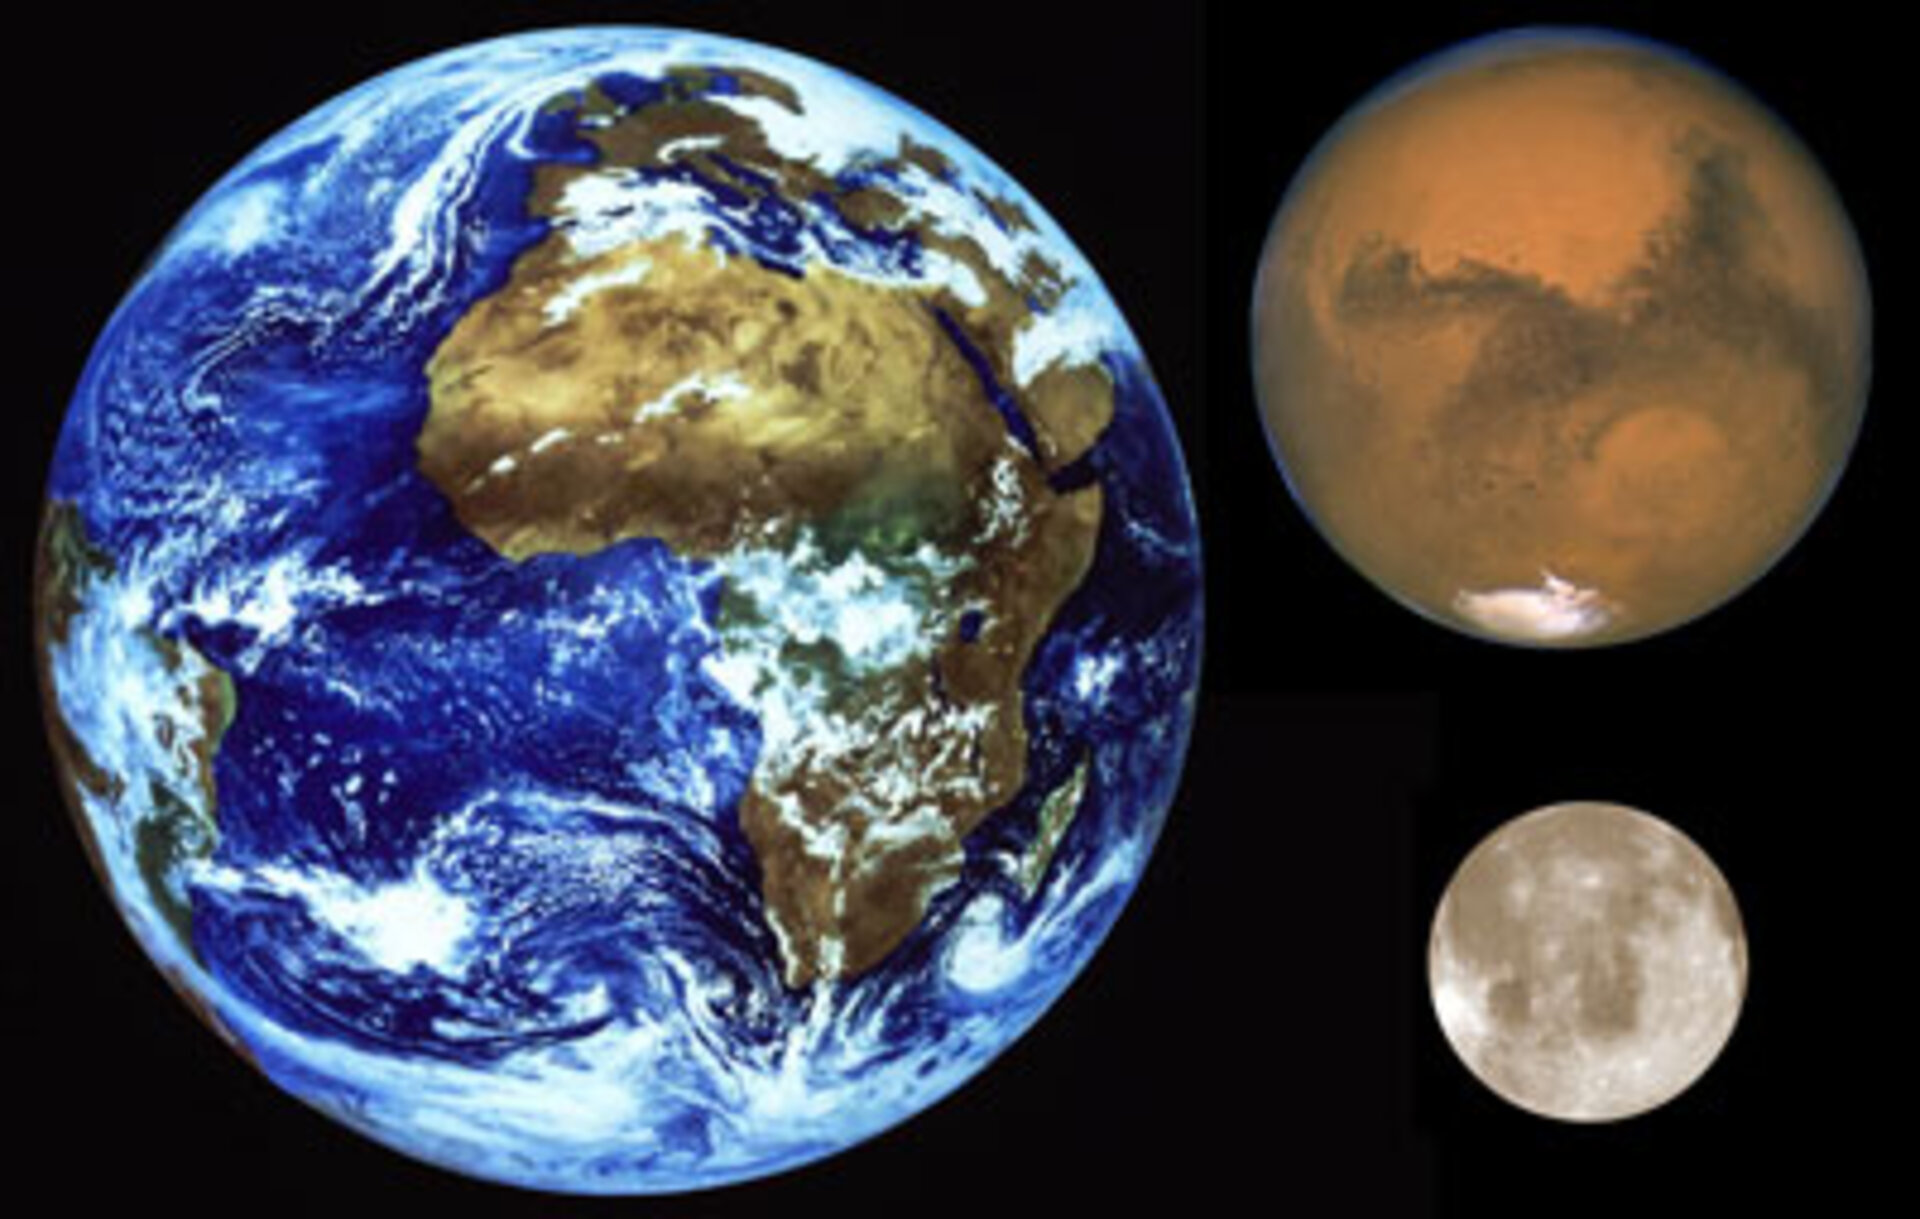 Earth compared in size to Mars and the Moon